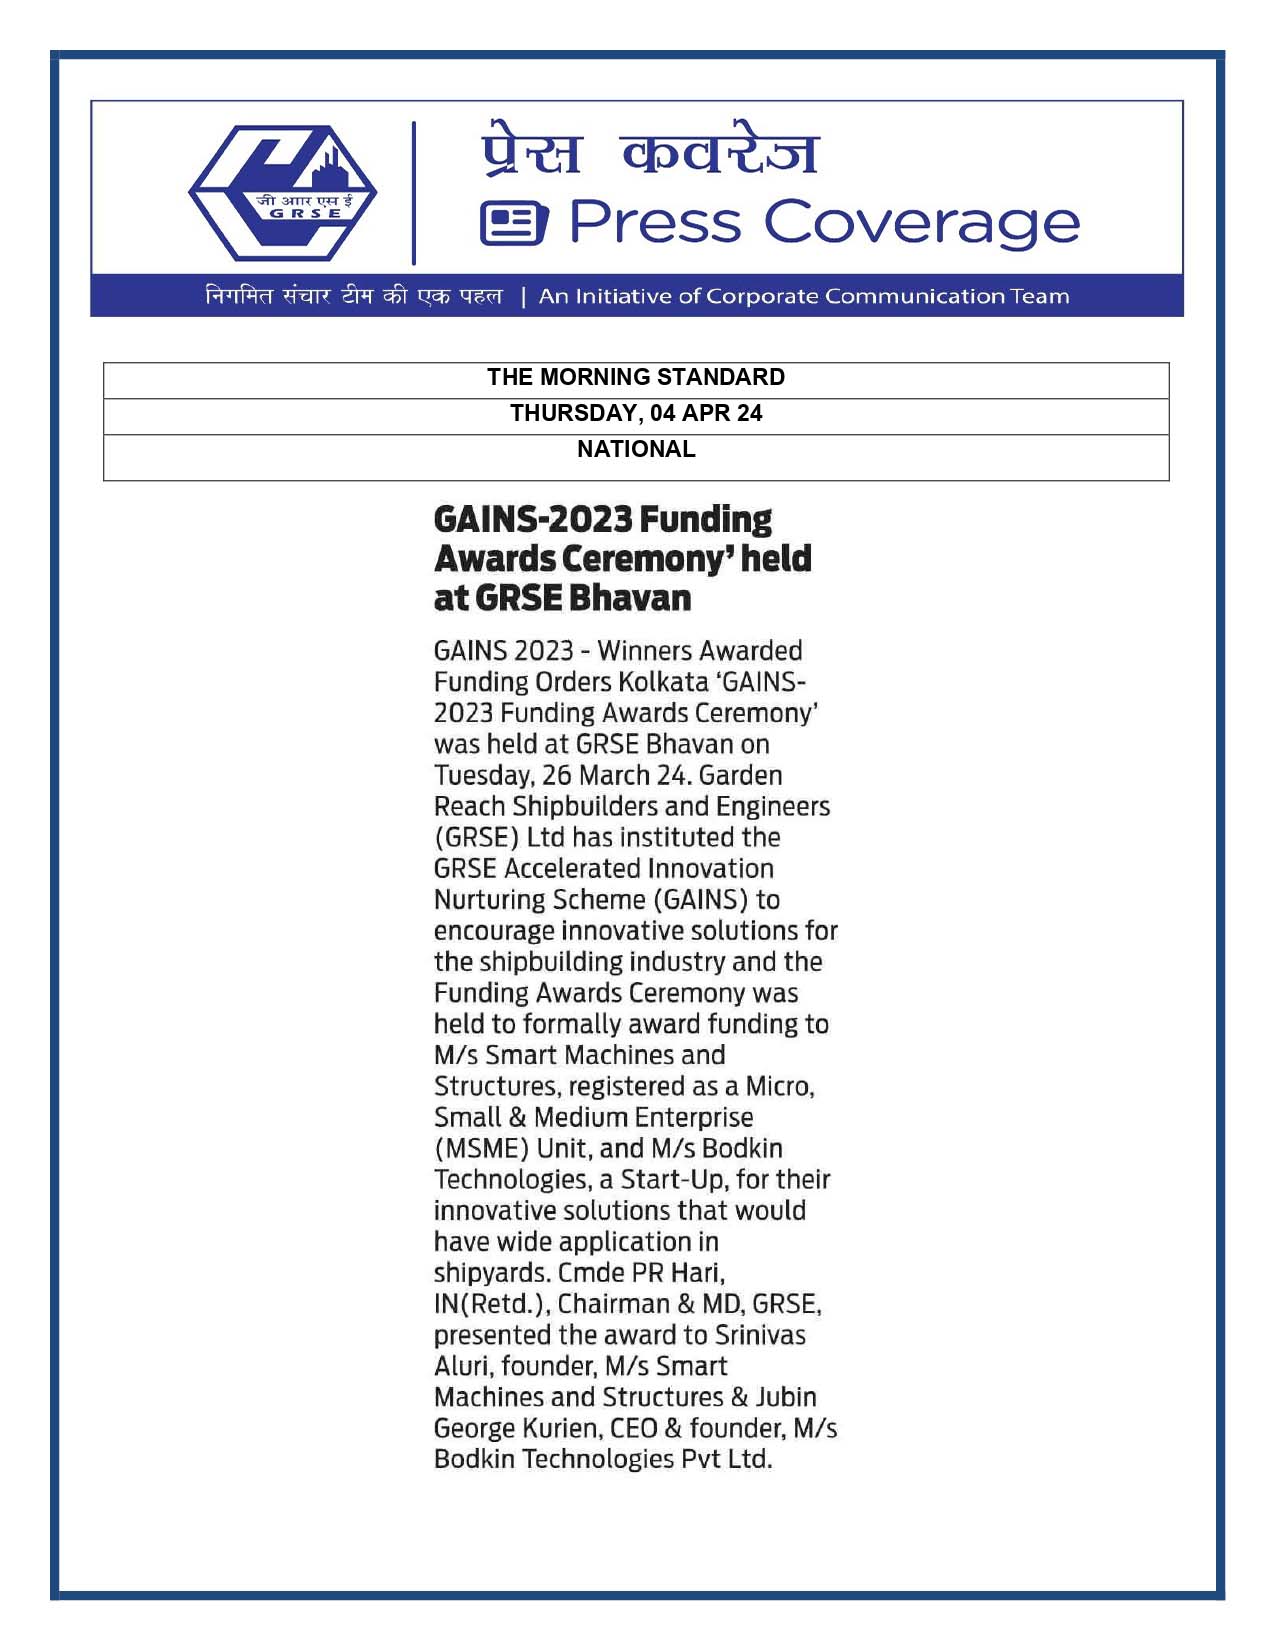 Press Coverage : The Morning Standard, 04 Apr 24 : GAINS 2023-Funding award ceremony held at GRSE Bhavan